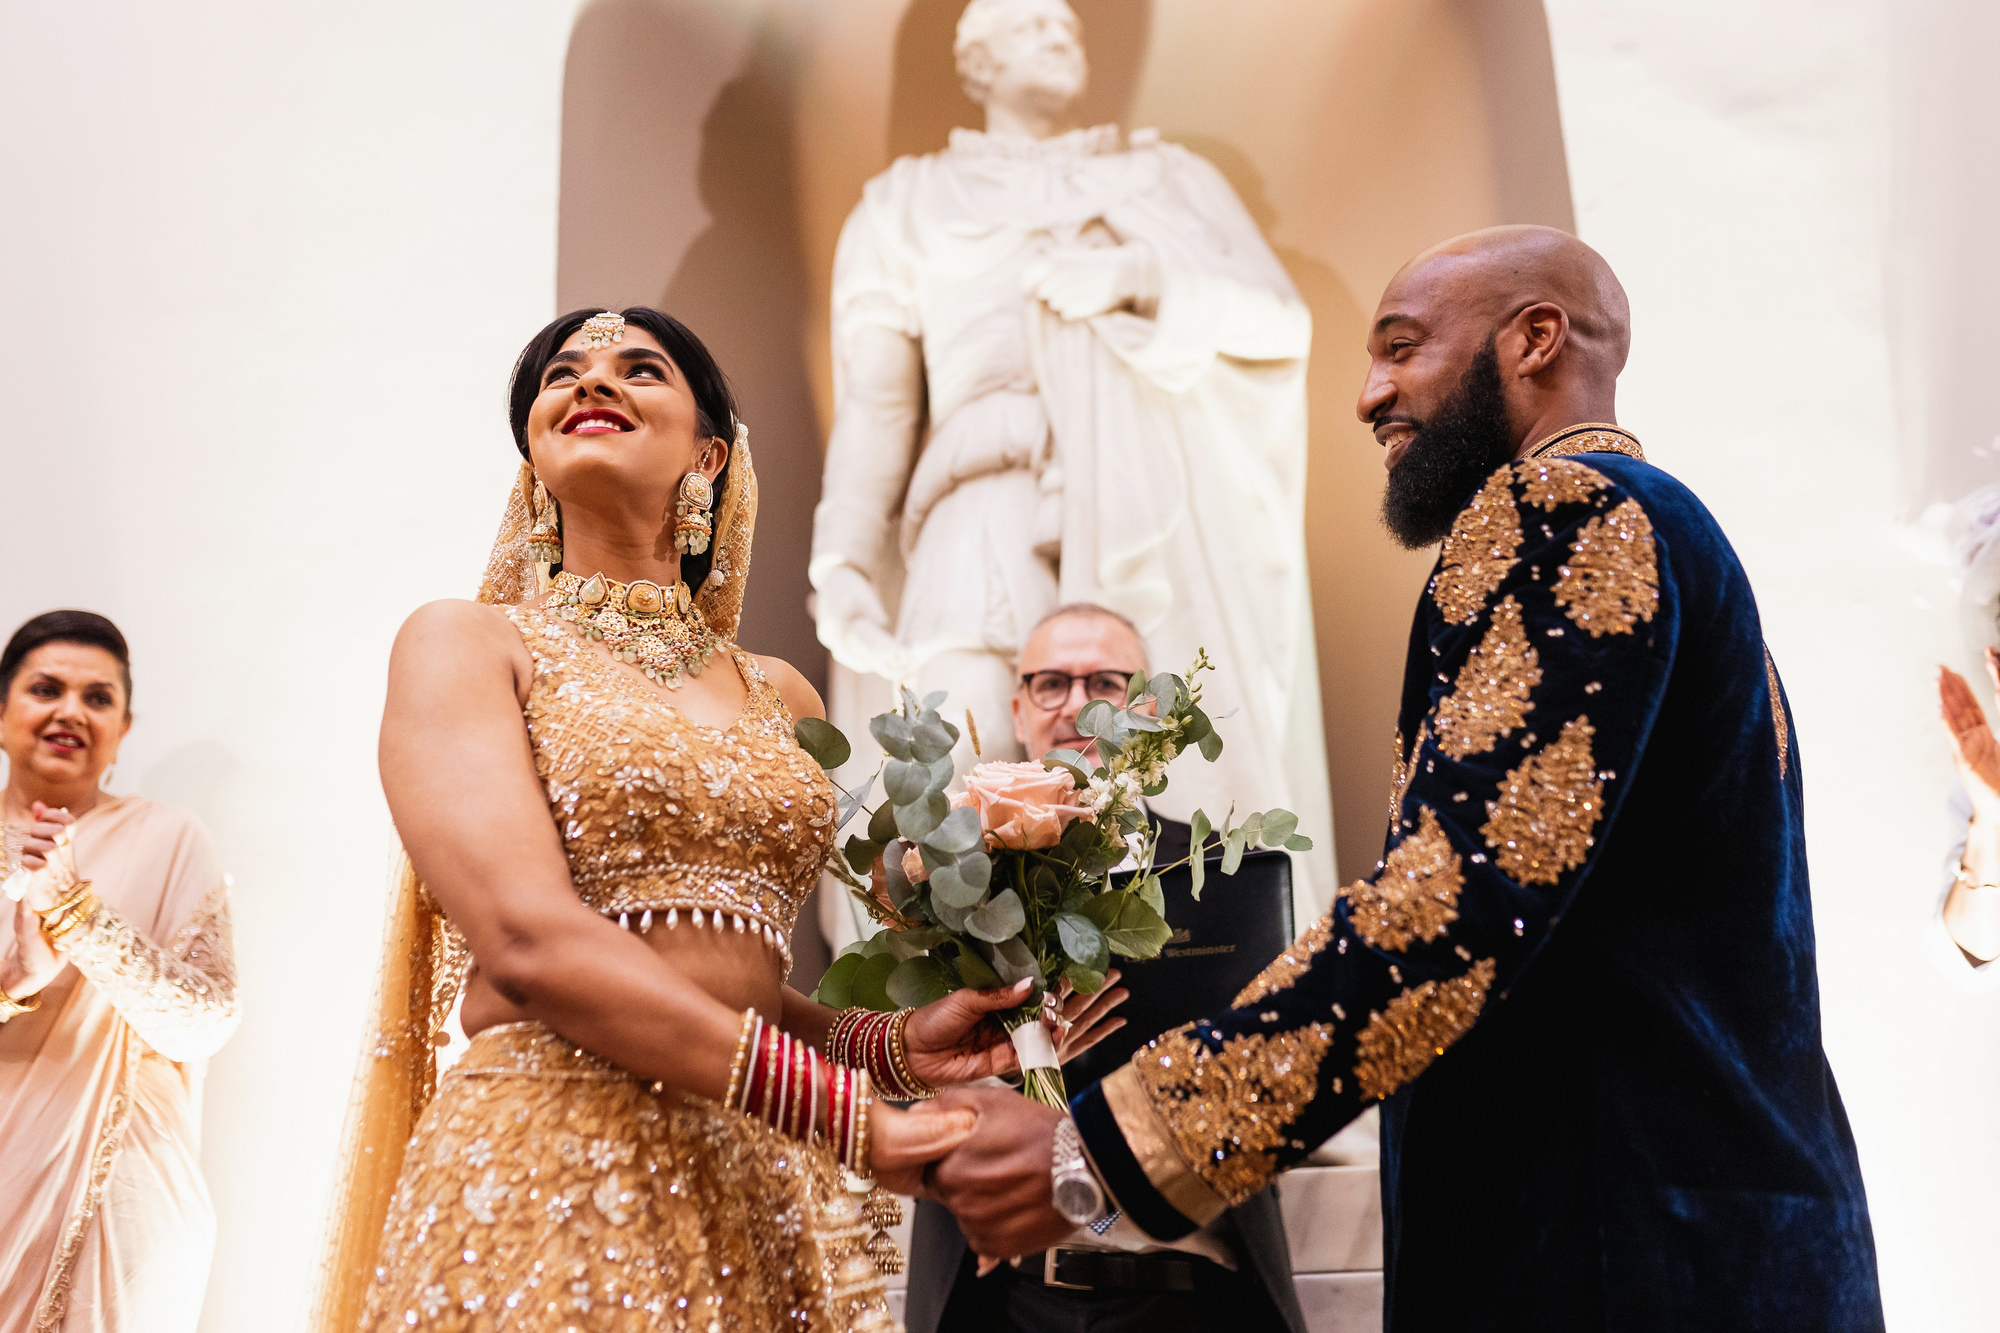 Multicultural wedding, Institute of Directors, IOD, 116 Pall Mall, London